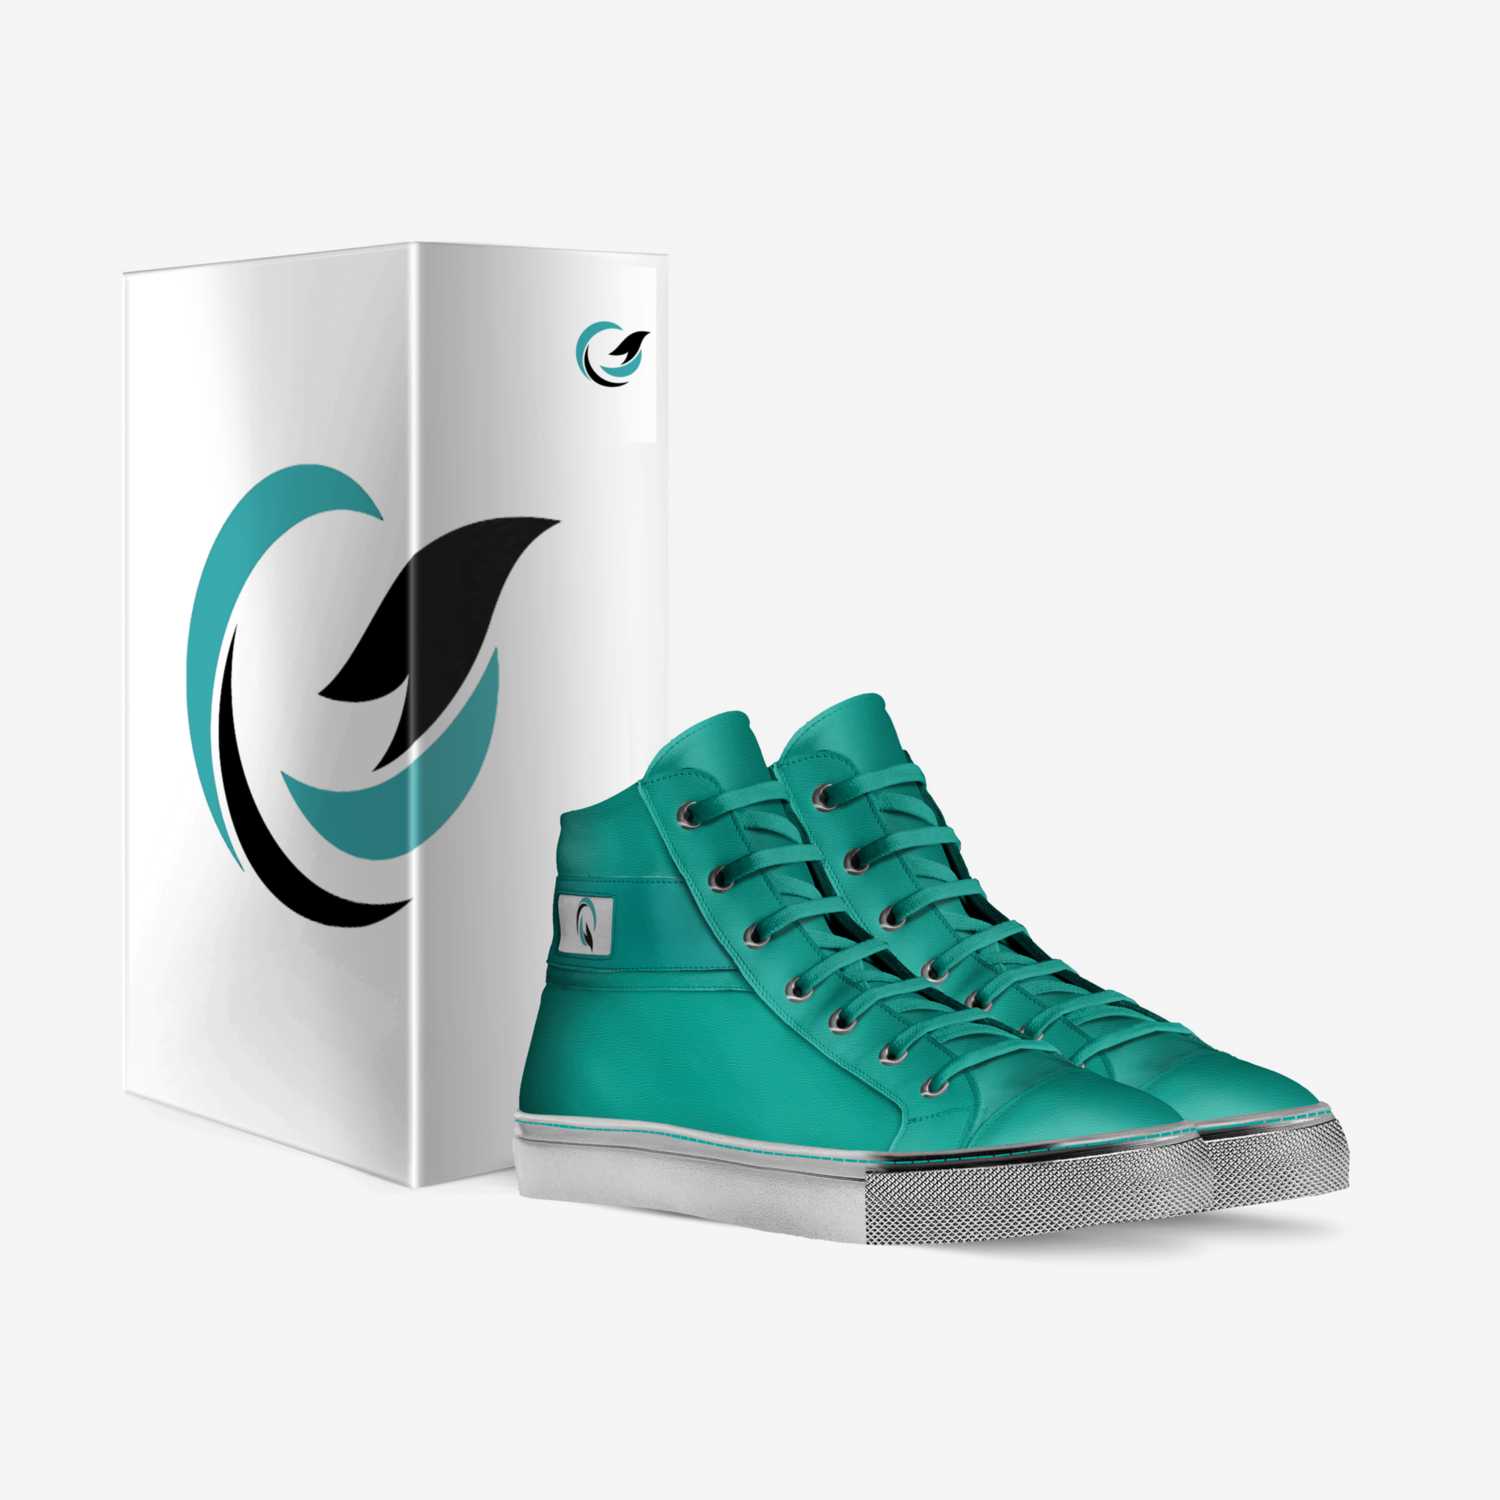 Q Global custom made in Italy shoes by David Quiles | Box view